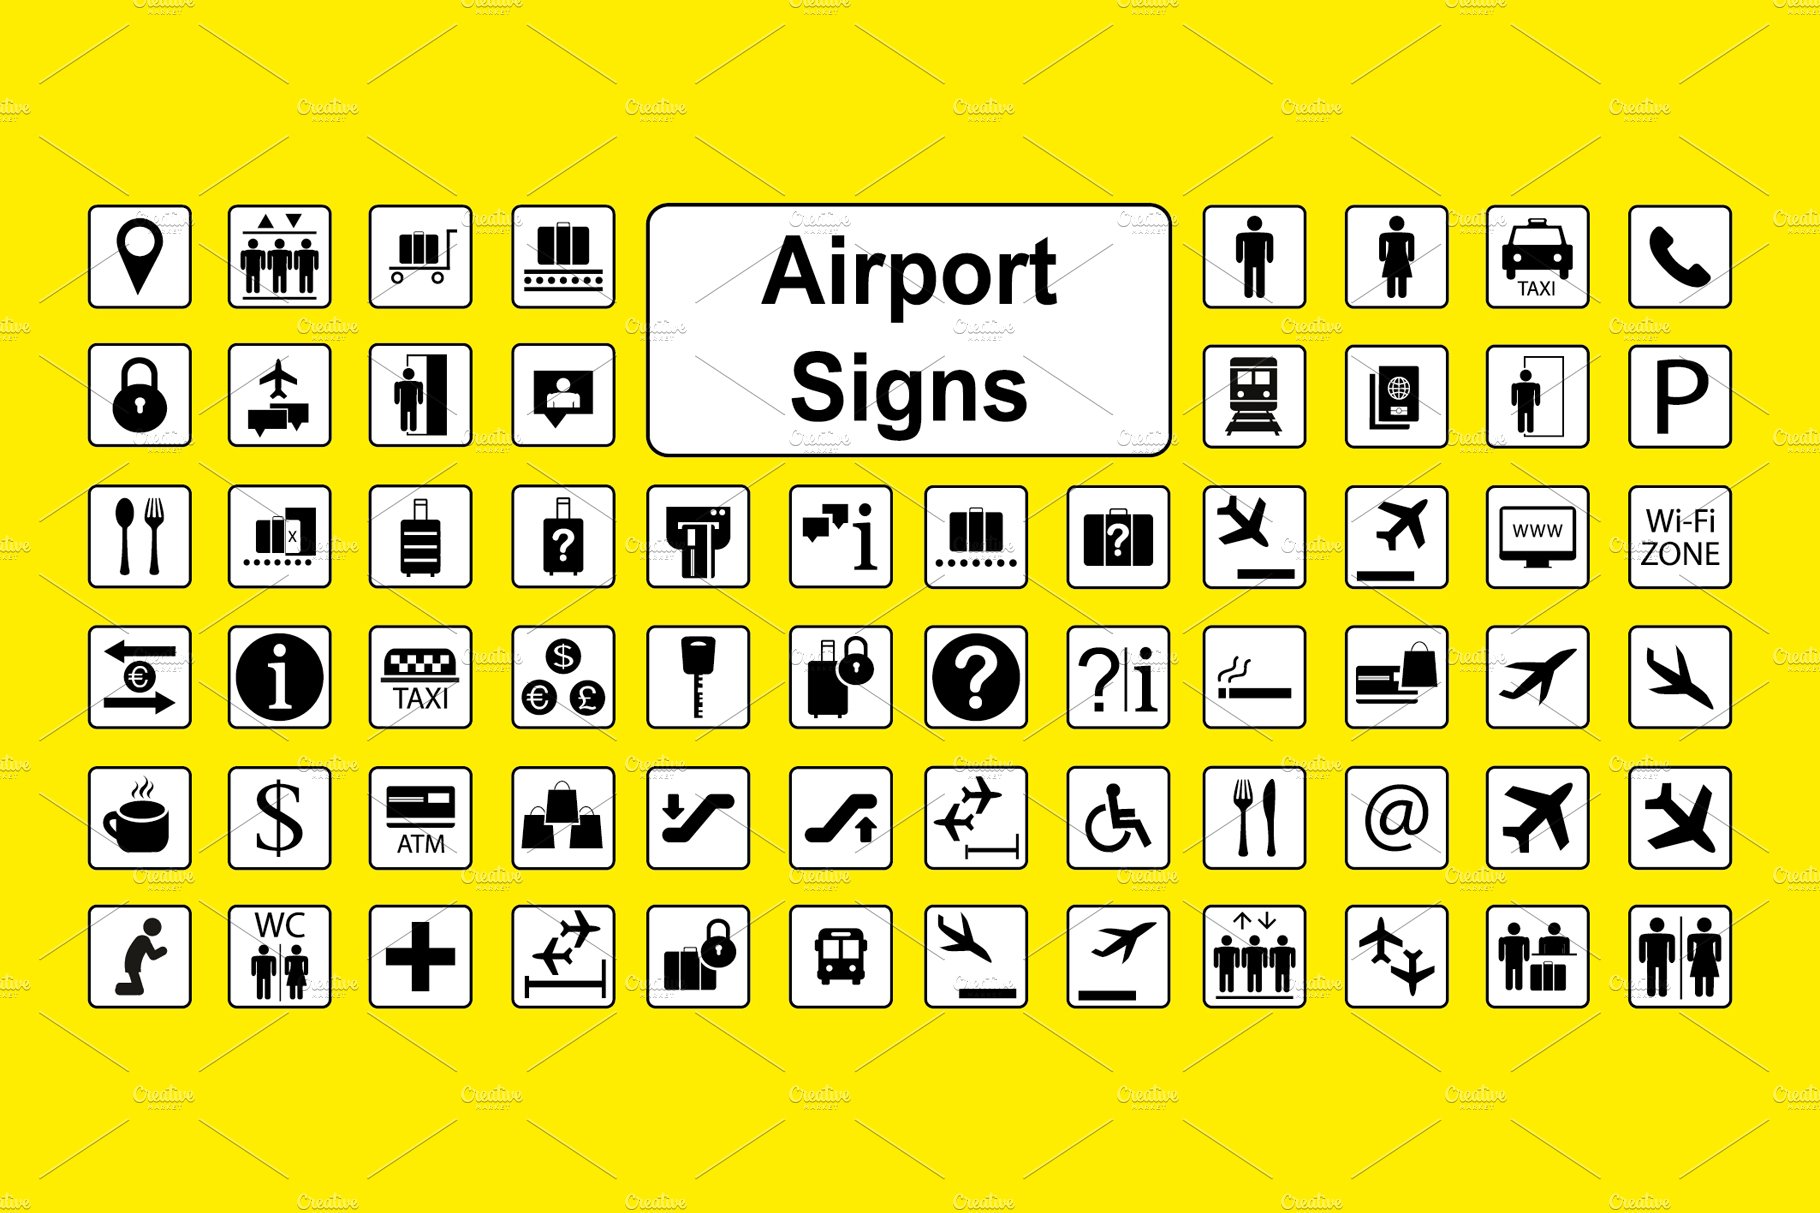 Huge set of airport icons cover image.